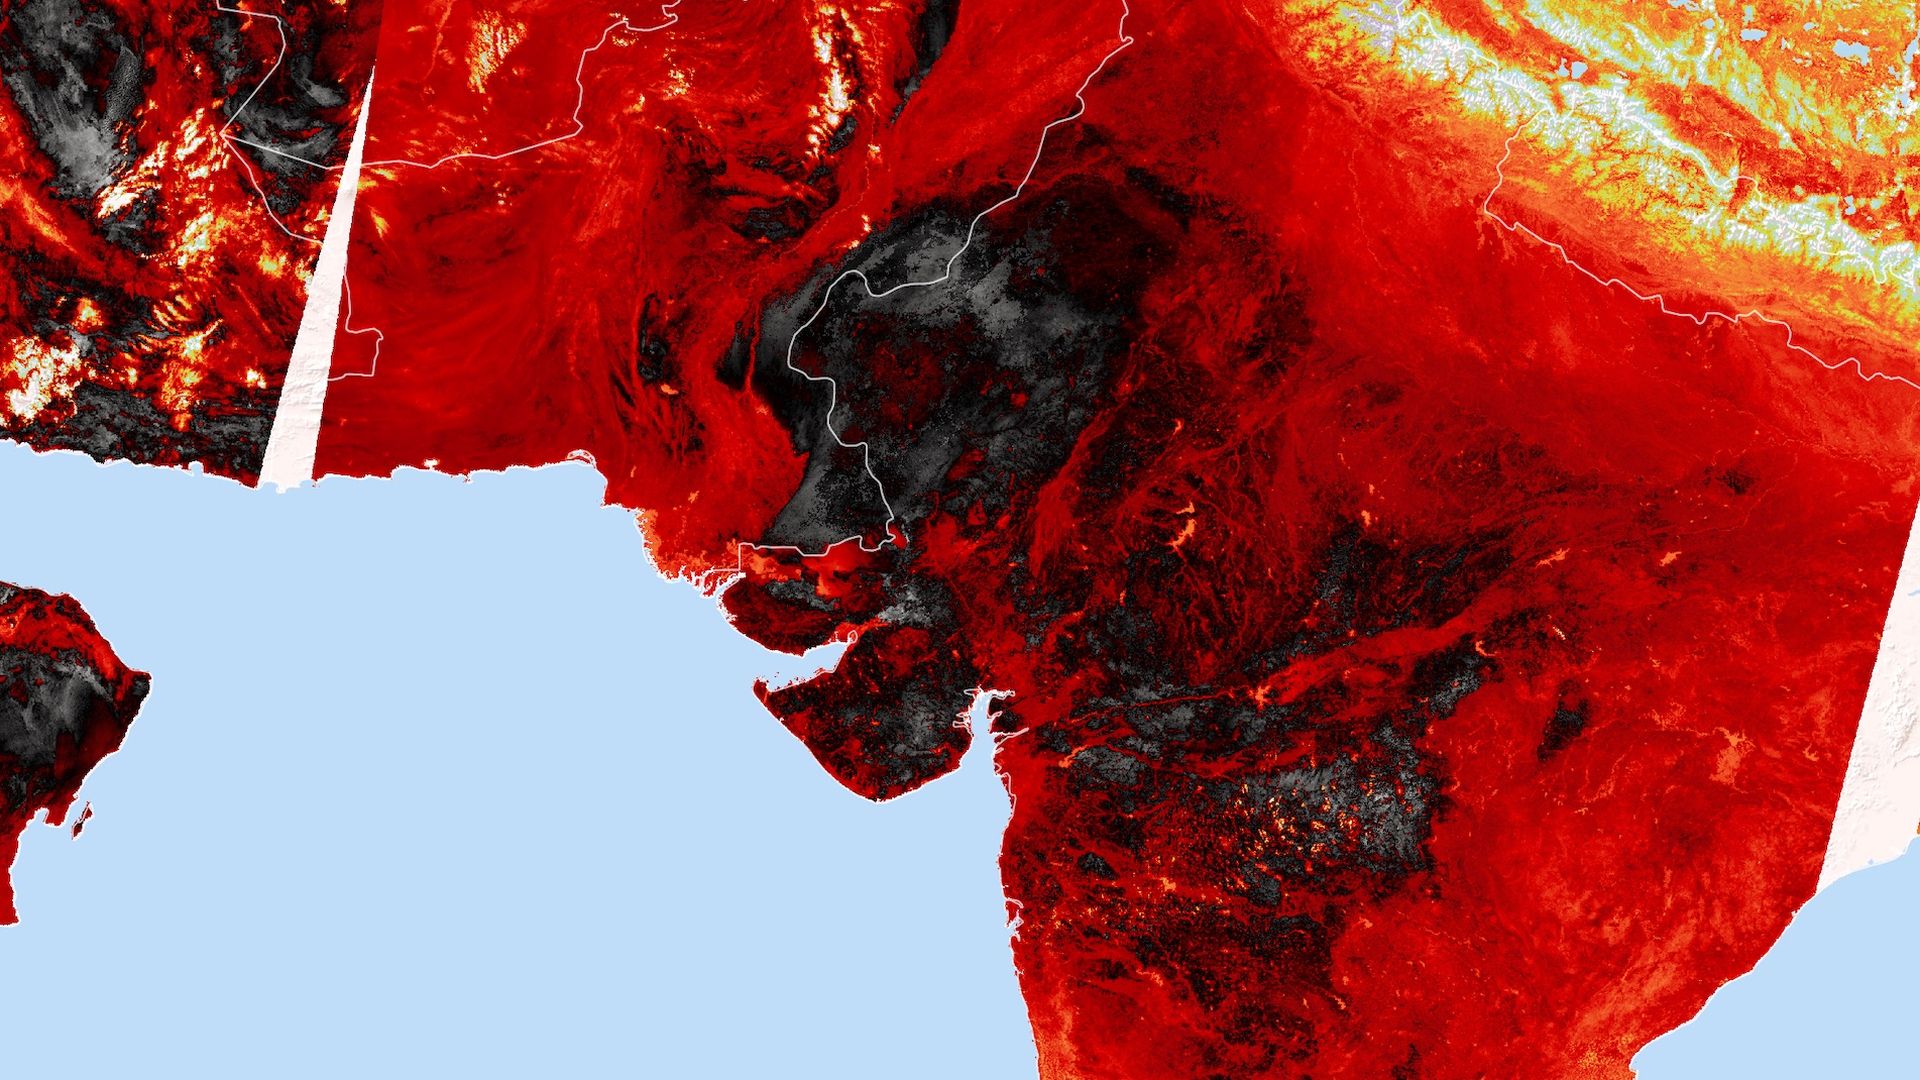 Satellite image showing land surface temperatures across India and Pakistan on April 28, 2022.